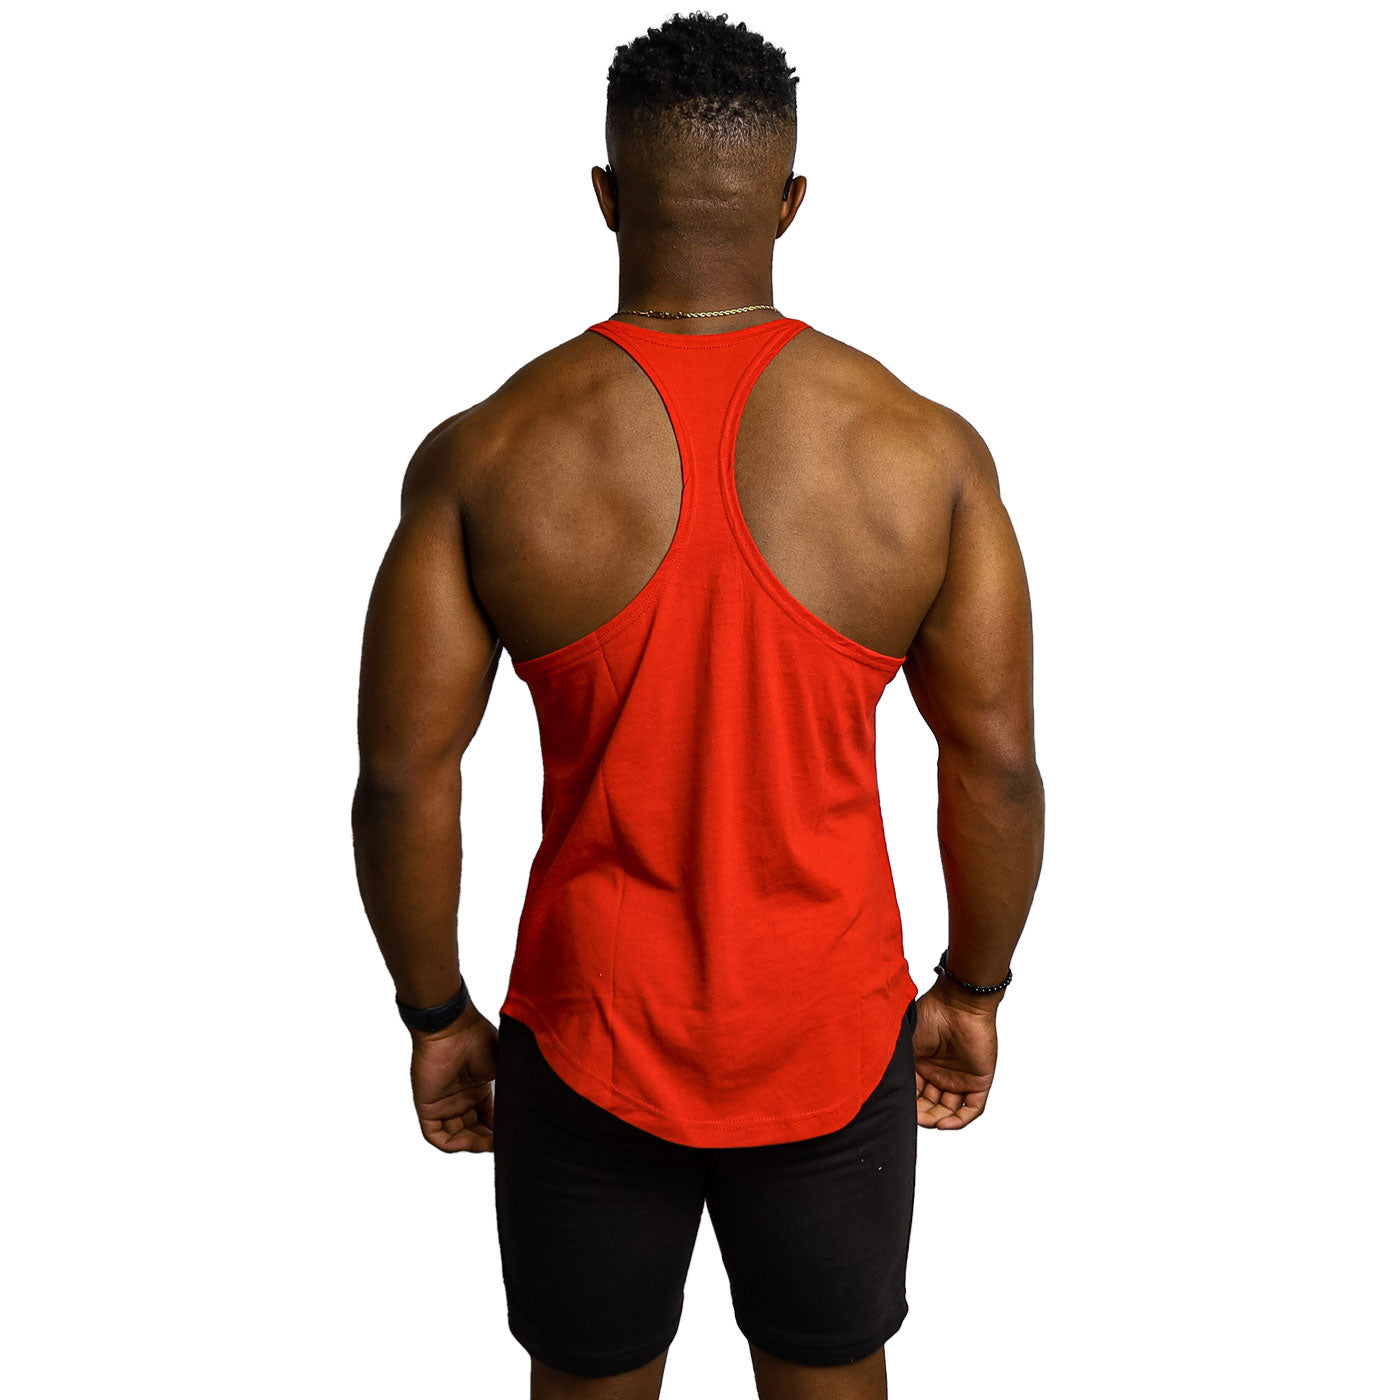 Beastpowergear Men's Gym Stringer Tank Top Y-Back Bodybuilding Workout  Muscle Cut Shirt Fitness Training Mesh Sleeveless Vest at  Men's  Clothing store